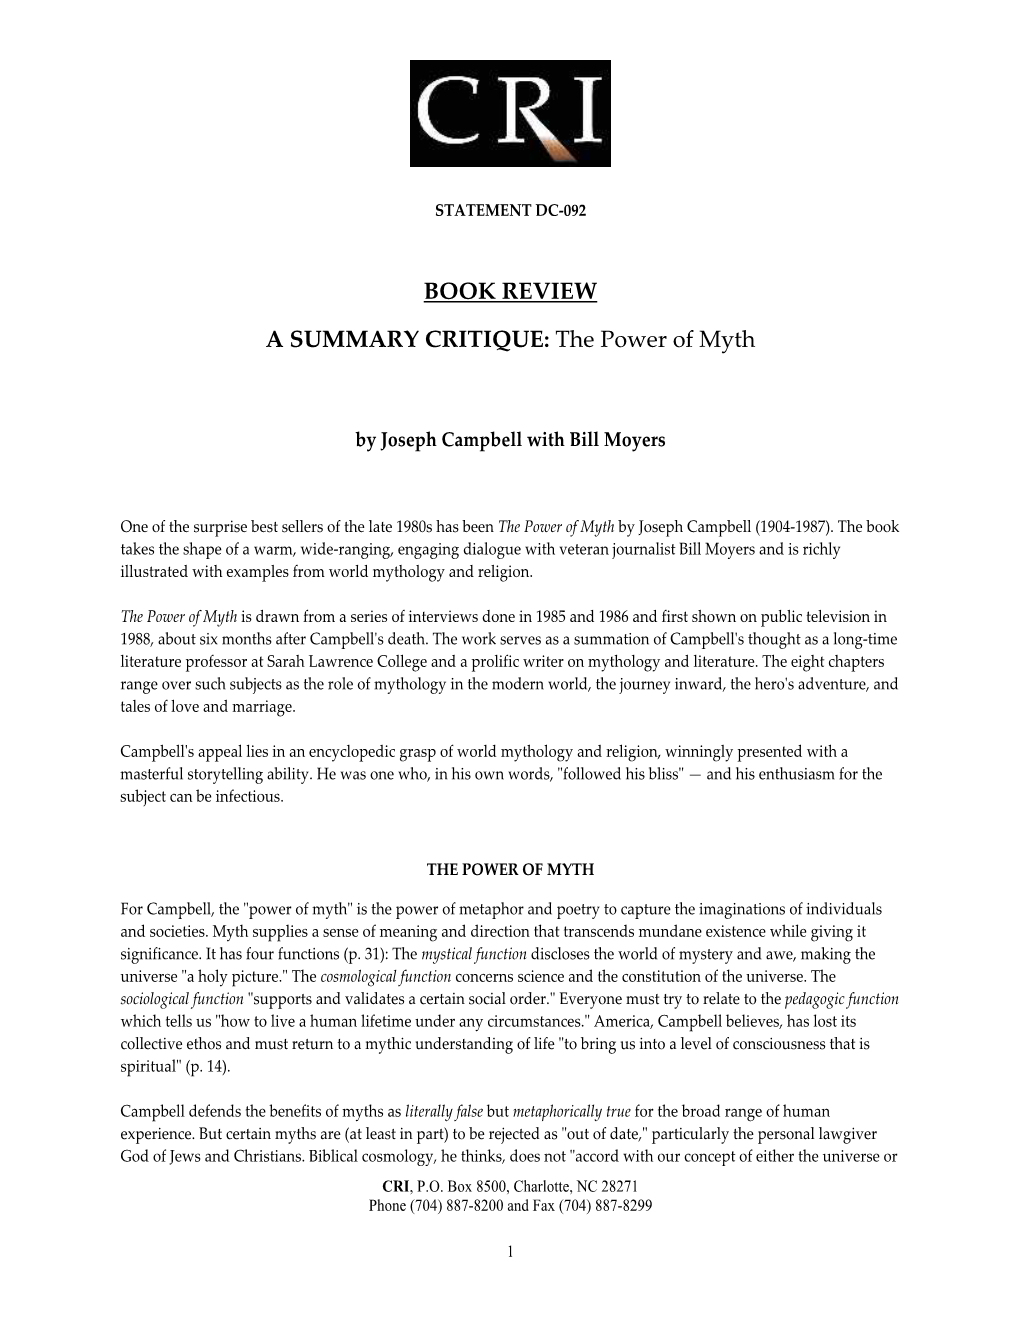 BOOK REVIEW a SUMMARY CRITIQUE: the Power of Myth